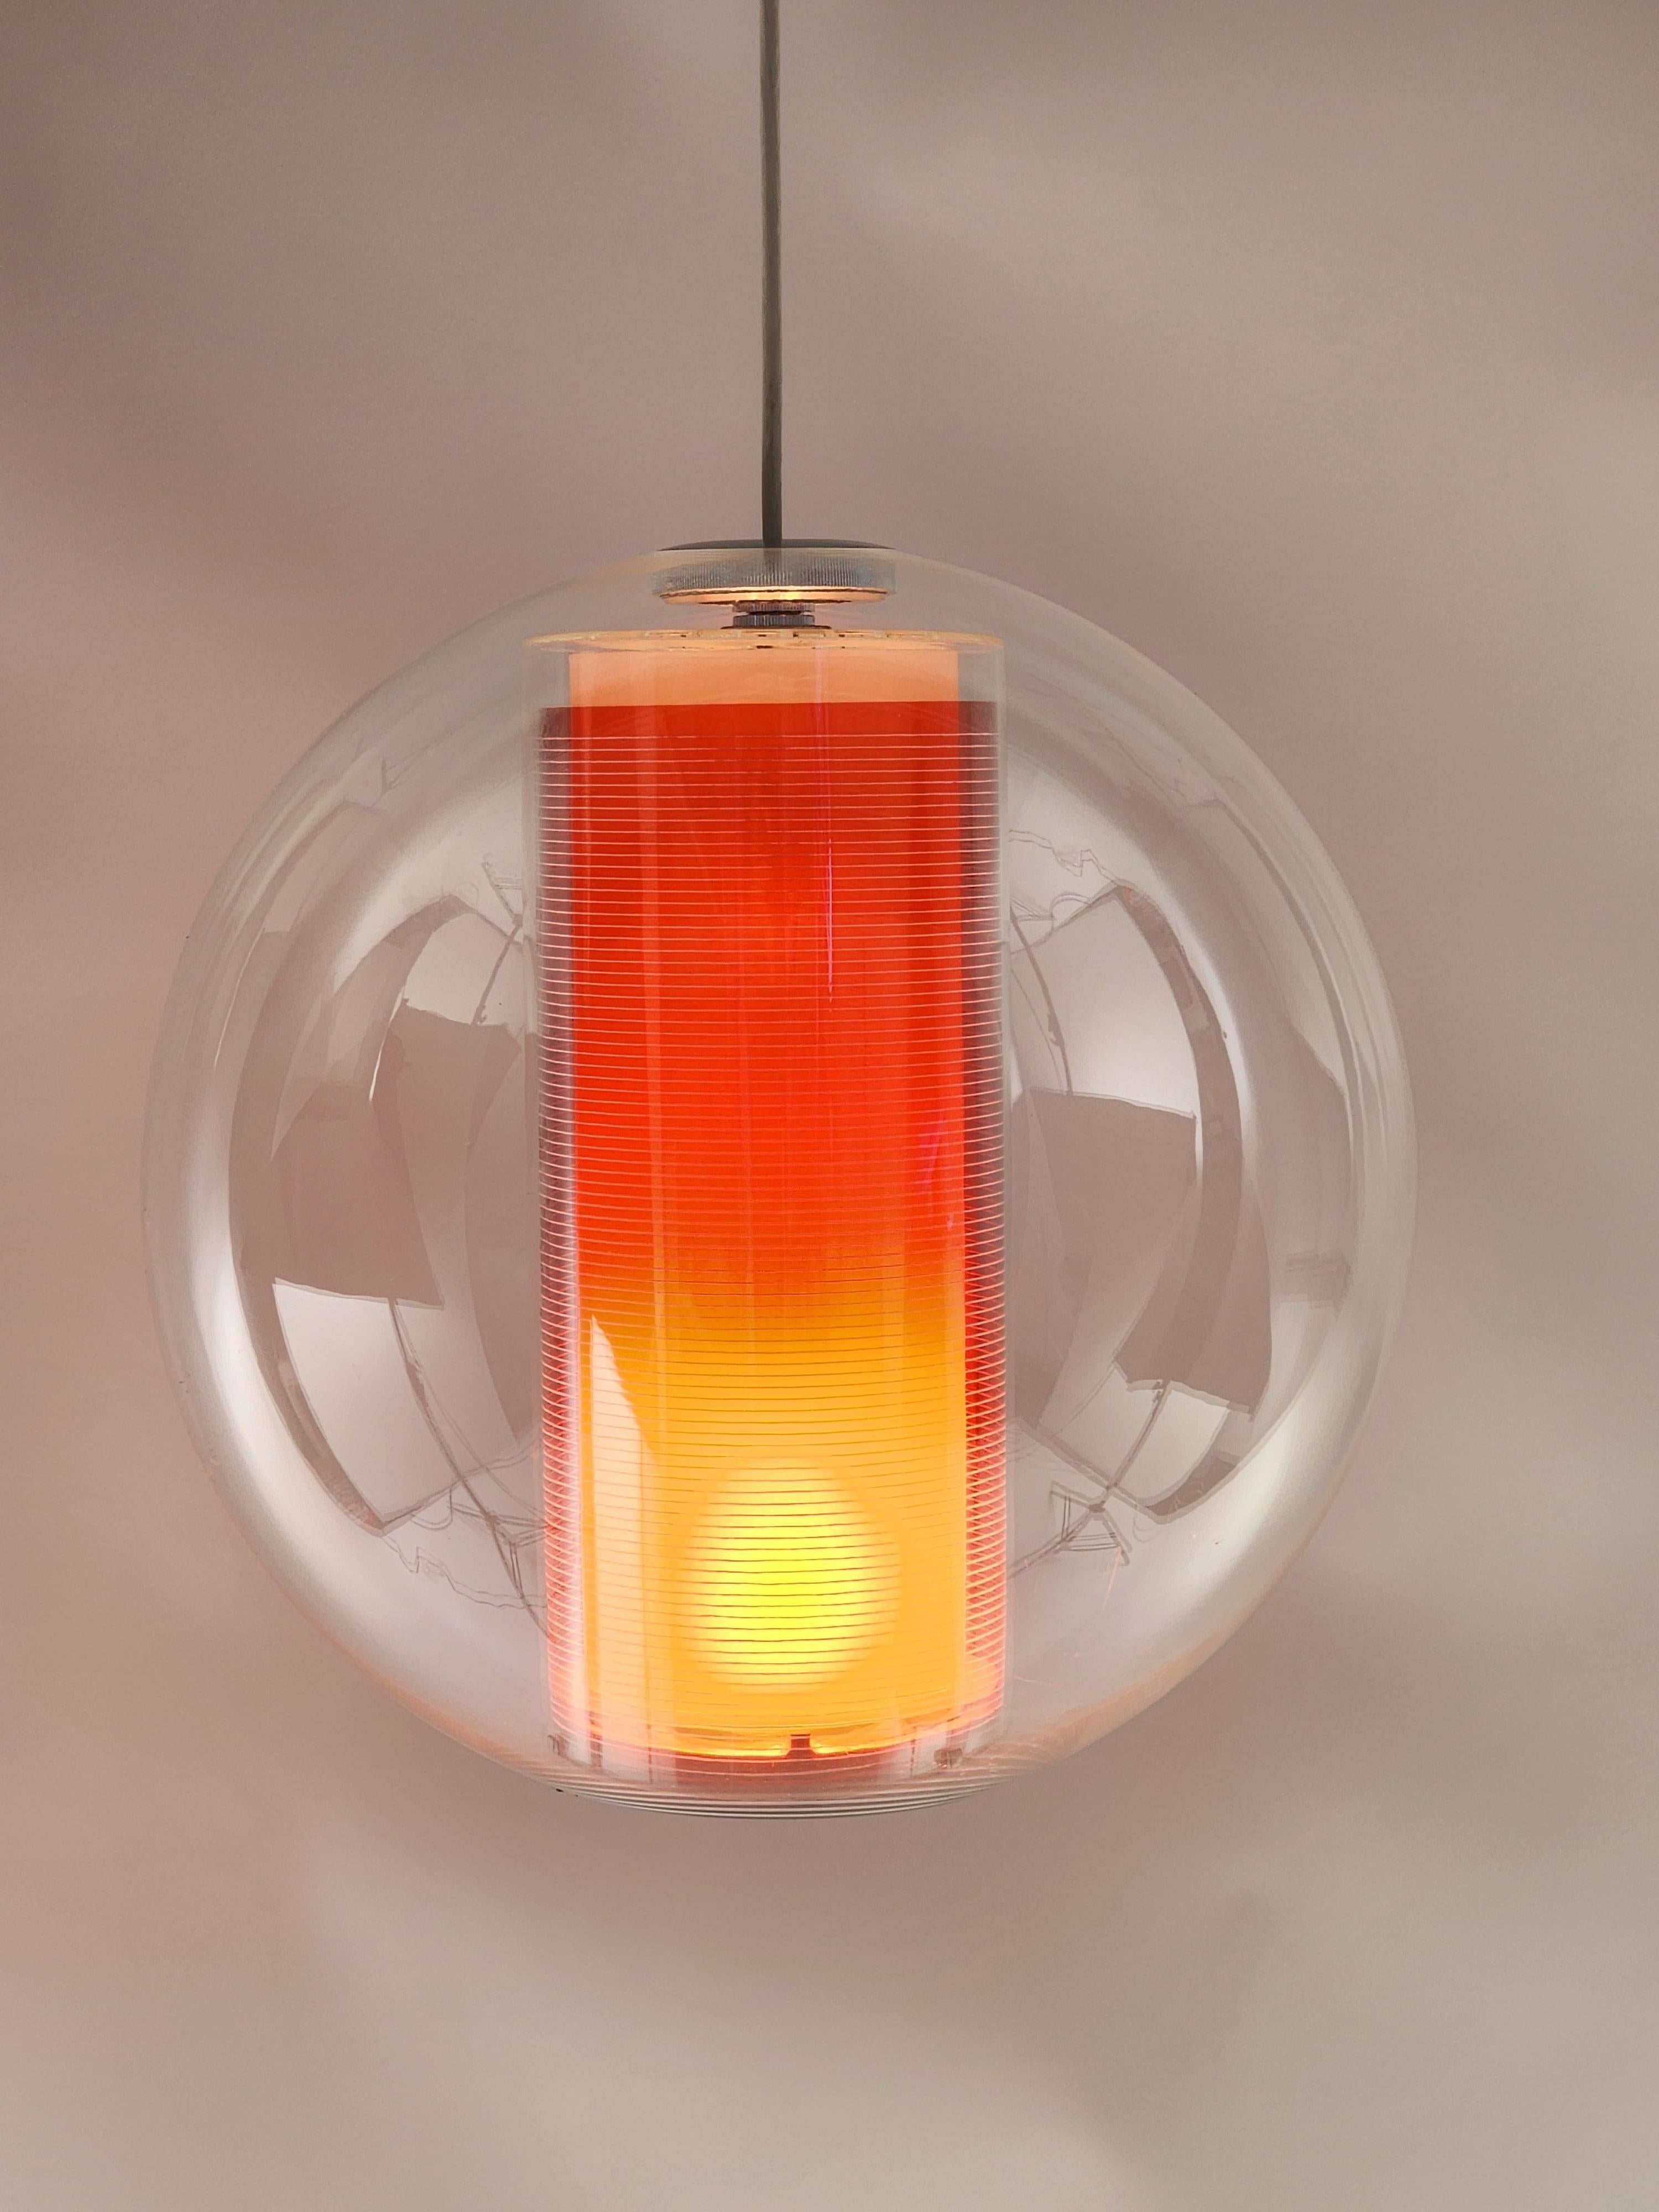 Contemporary 2000s Clear Acrylic Pendant with Orange Sleeve, USA For Sale